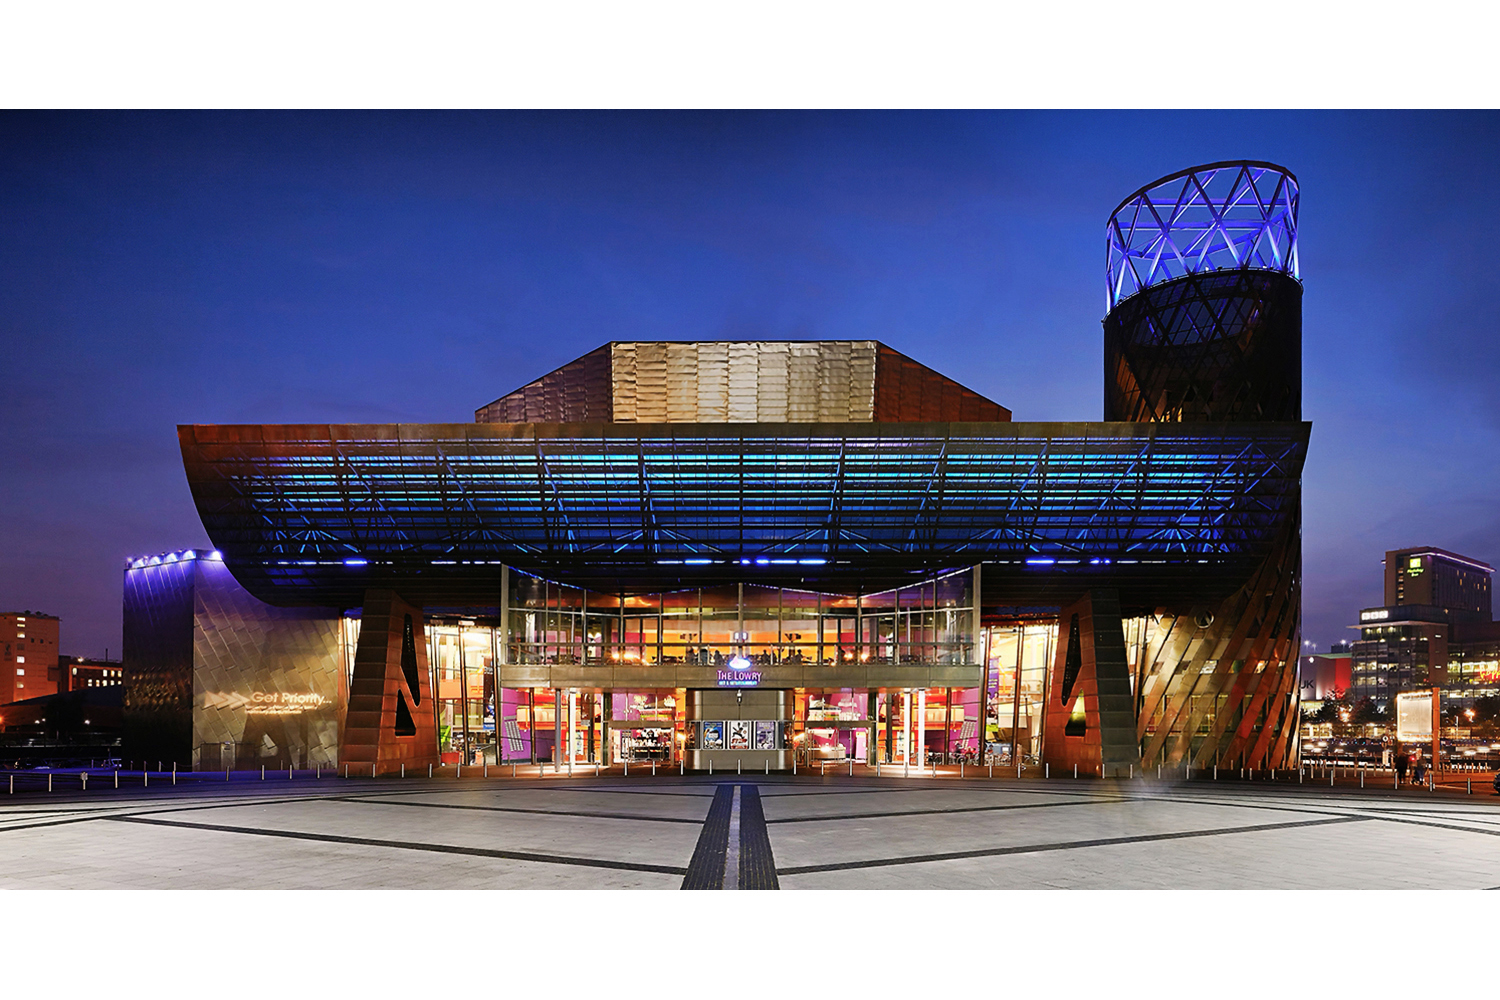 Architectural photography exterior: Lowry theatre, Salford Quays, Salford, Greater Manchester, UK. Architect: Michael Wilford. Image (C) Matthewlingphotography.co.uk